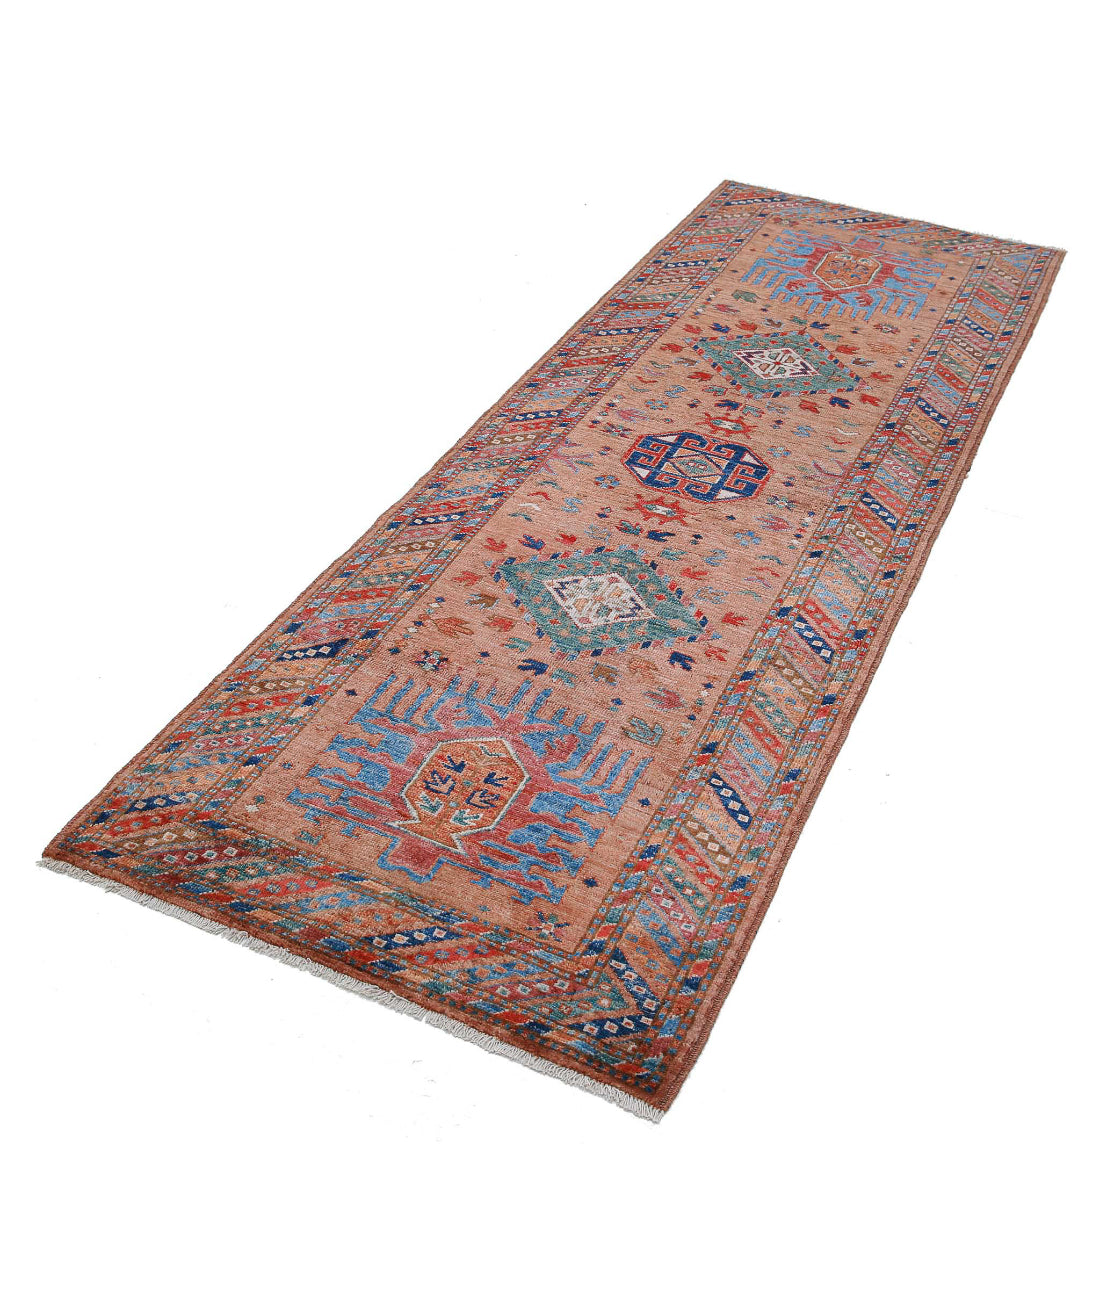 Hand Knotted Nomadic Caucasian Humna Wool Rug - 2'9'' x 8'0'' 2'9'' x 8'0'' (83 X 240) / Taupe / Multi